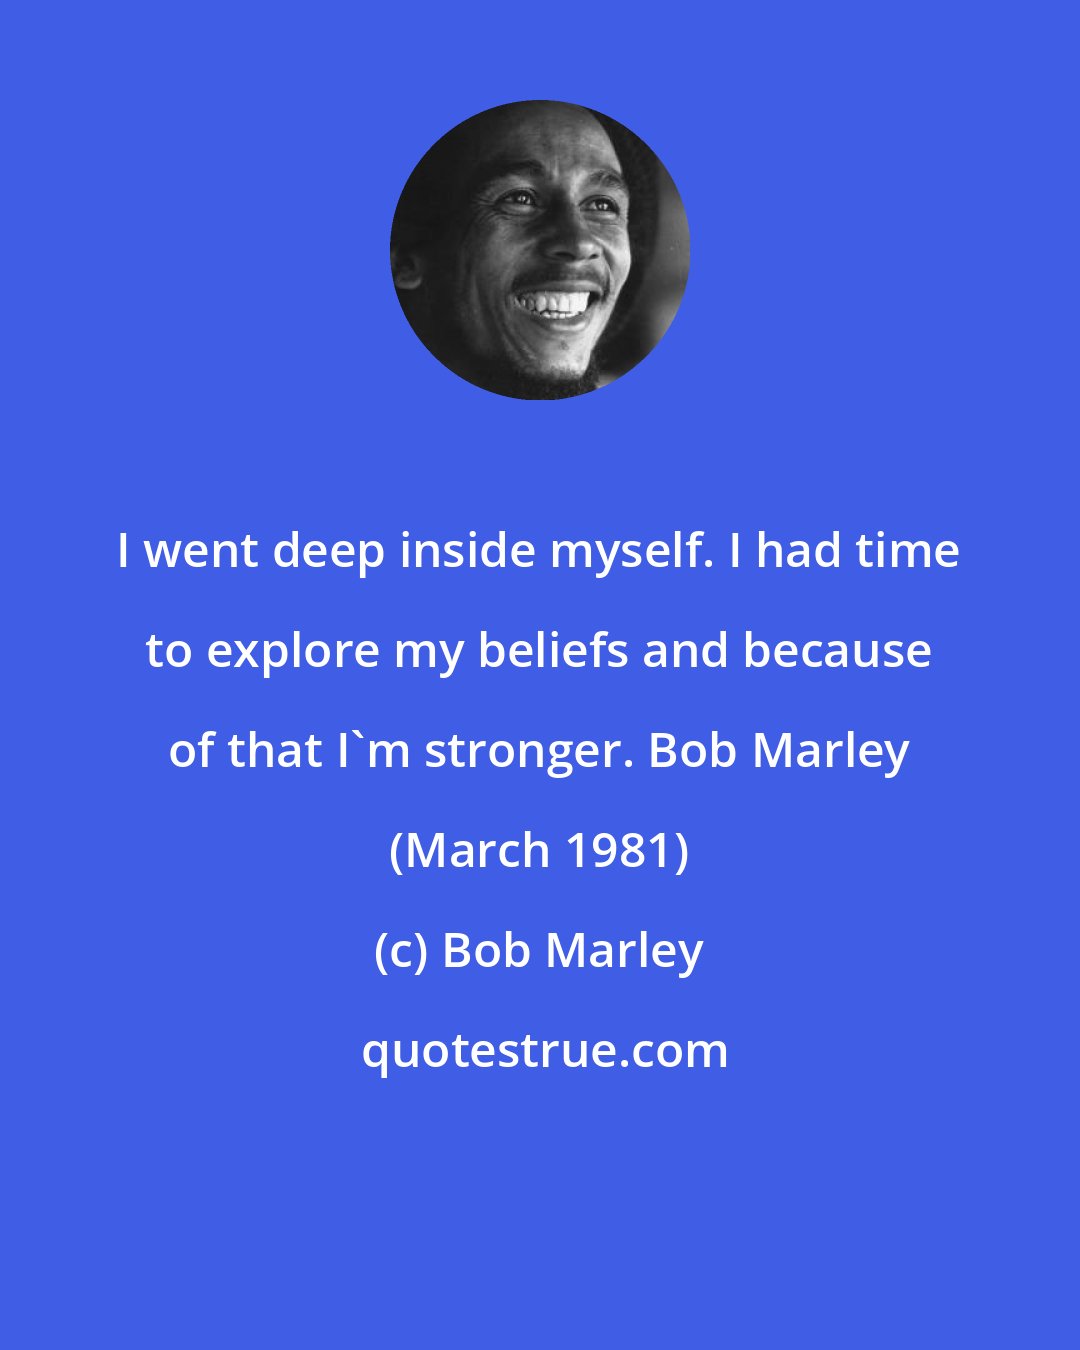 Bob Marley: I went deep inside myself. I had time to explore my beliefs and because of that I'm stronger. Bob Marley (March 1981)